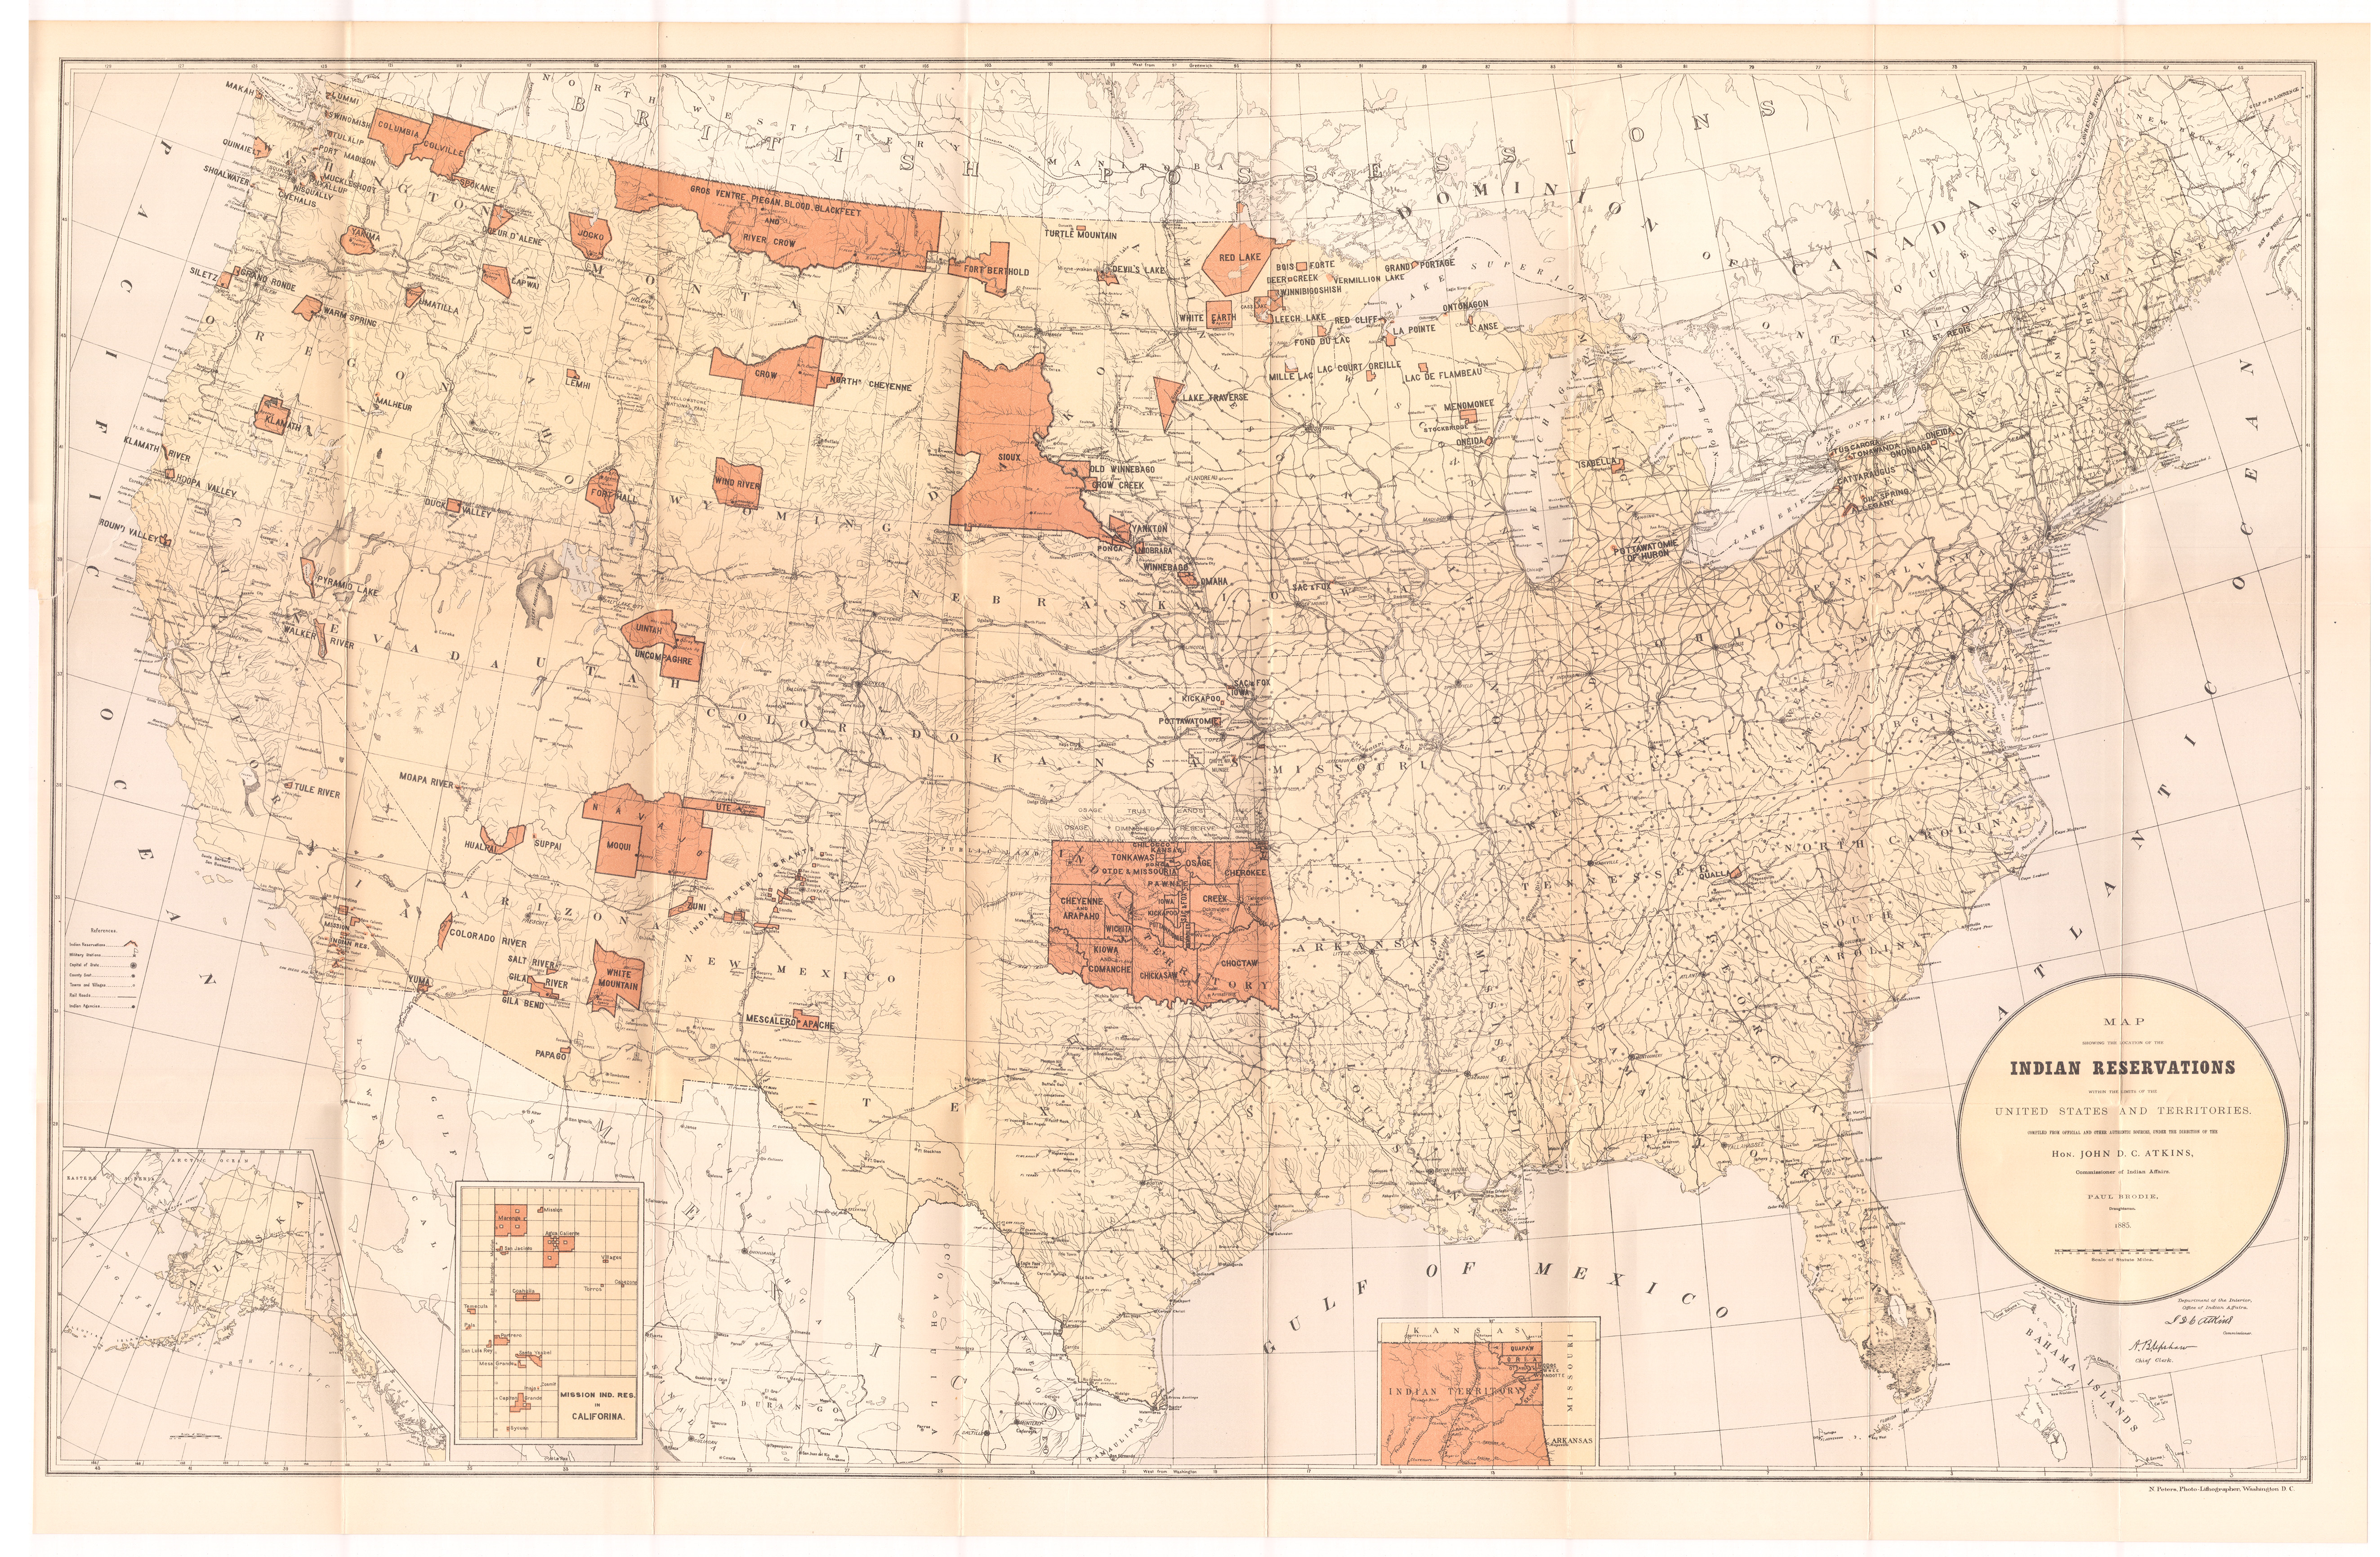 1885 Paul Brodie map of Indian Reservations, 